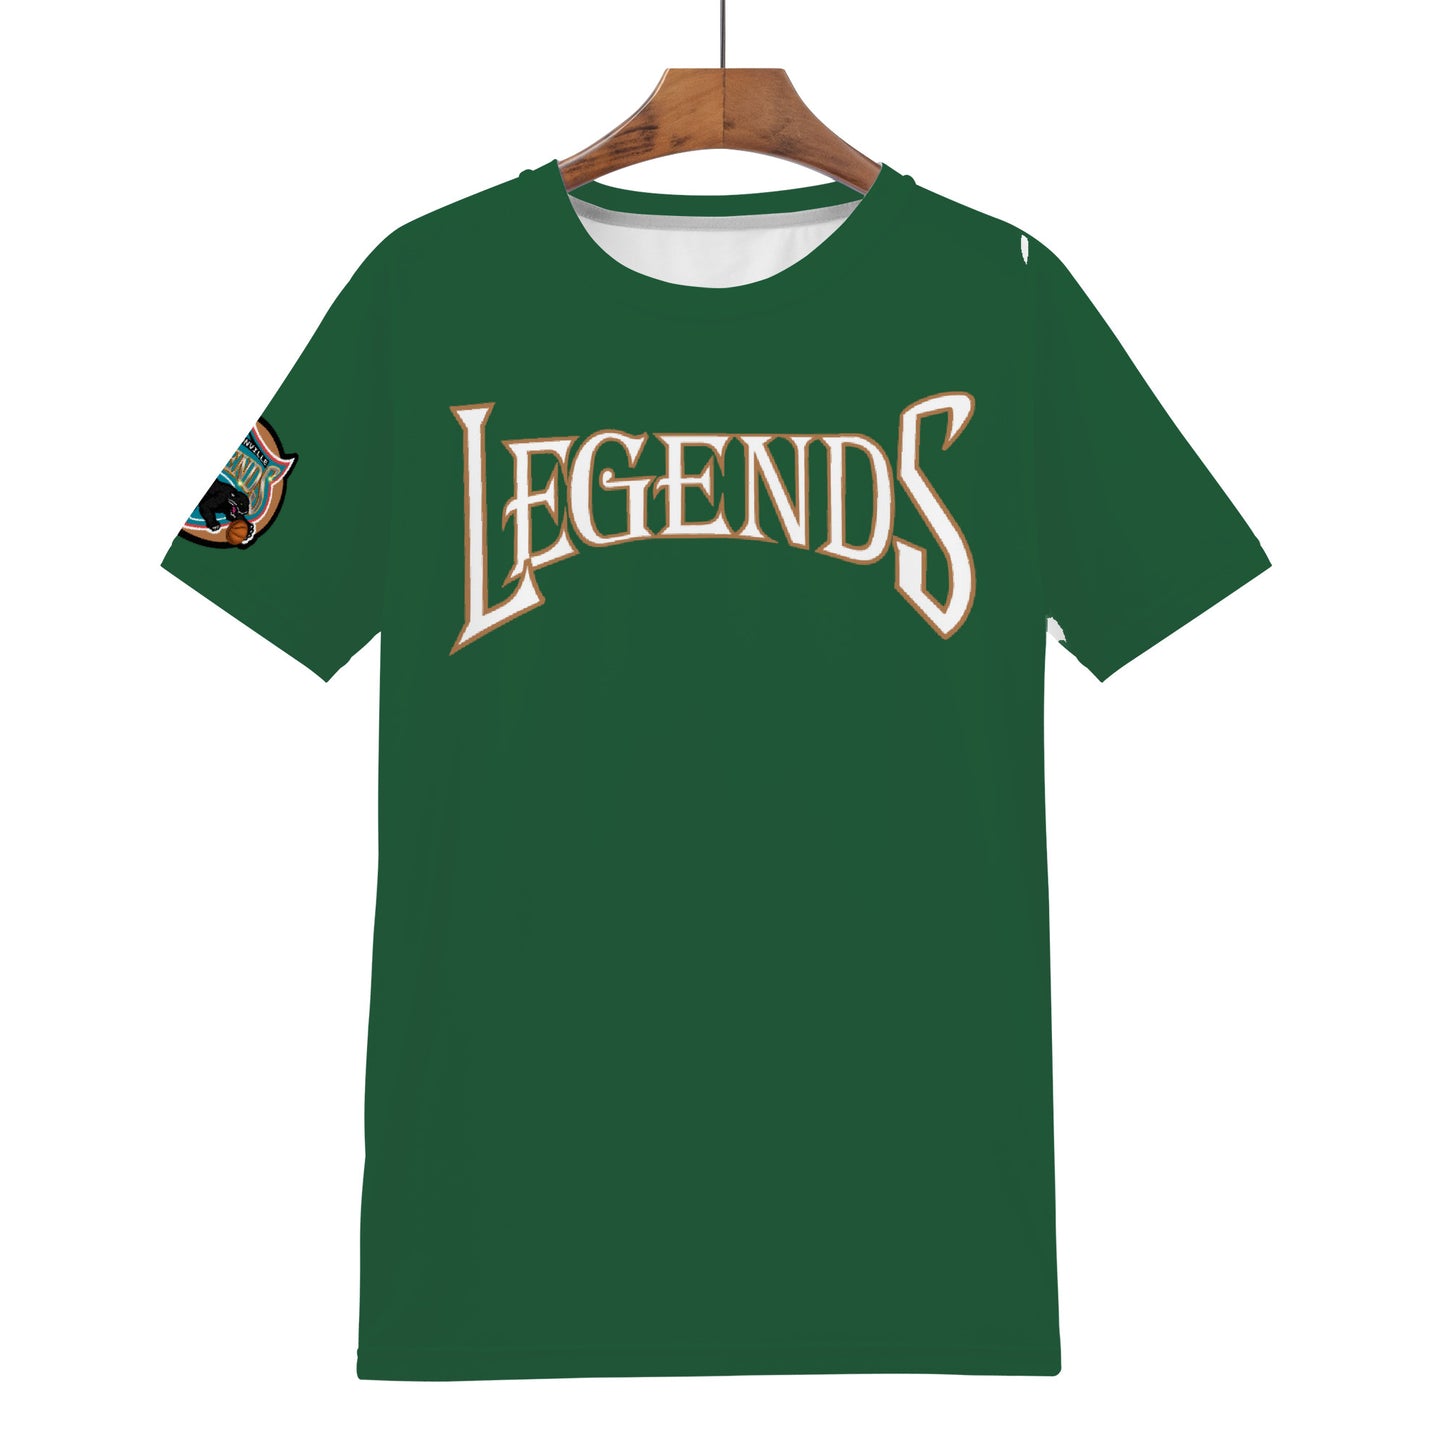 LEGENDS *Equality* Tee 6